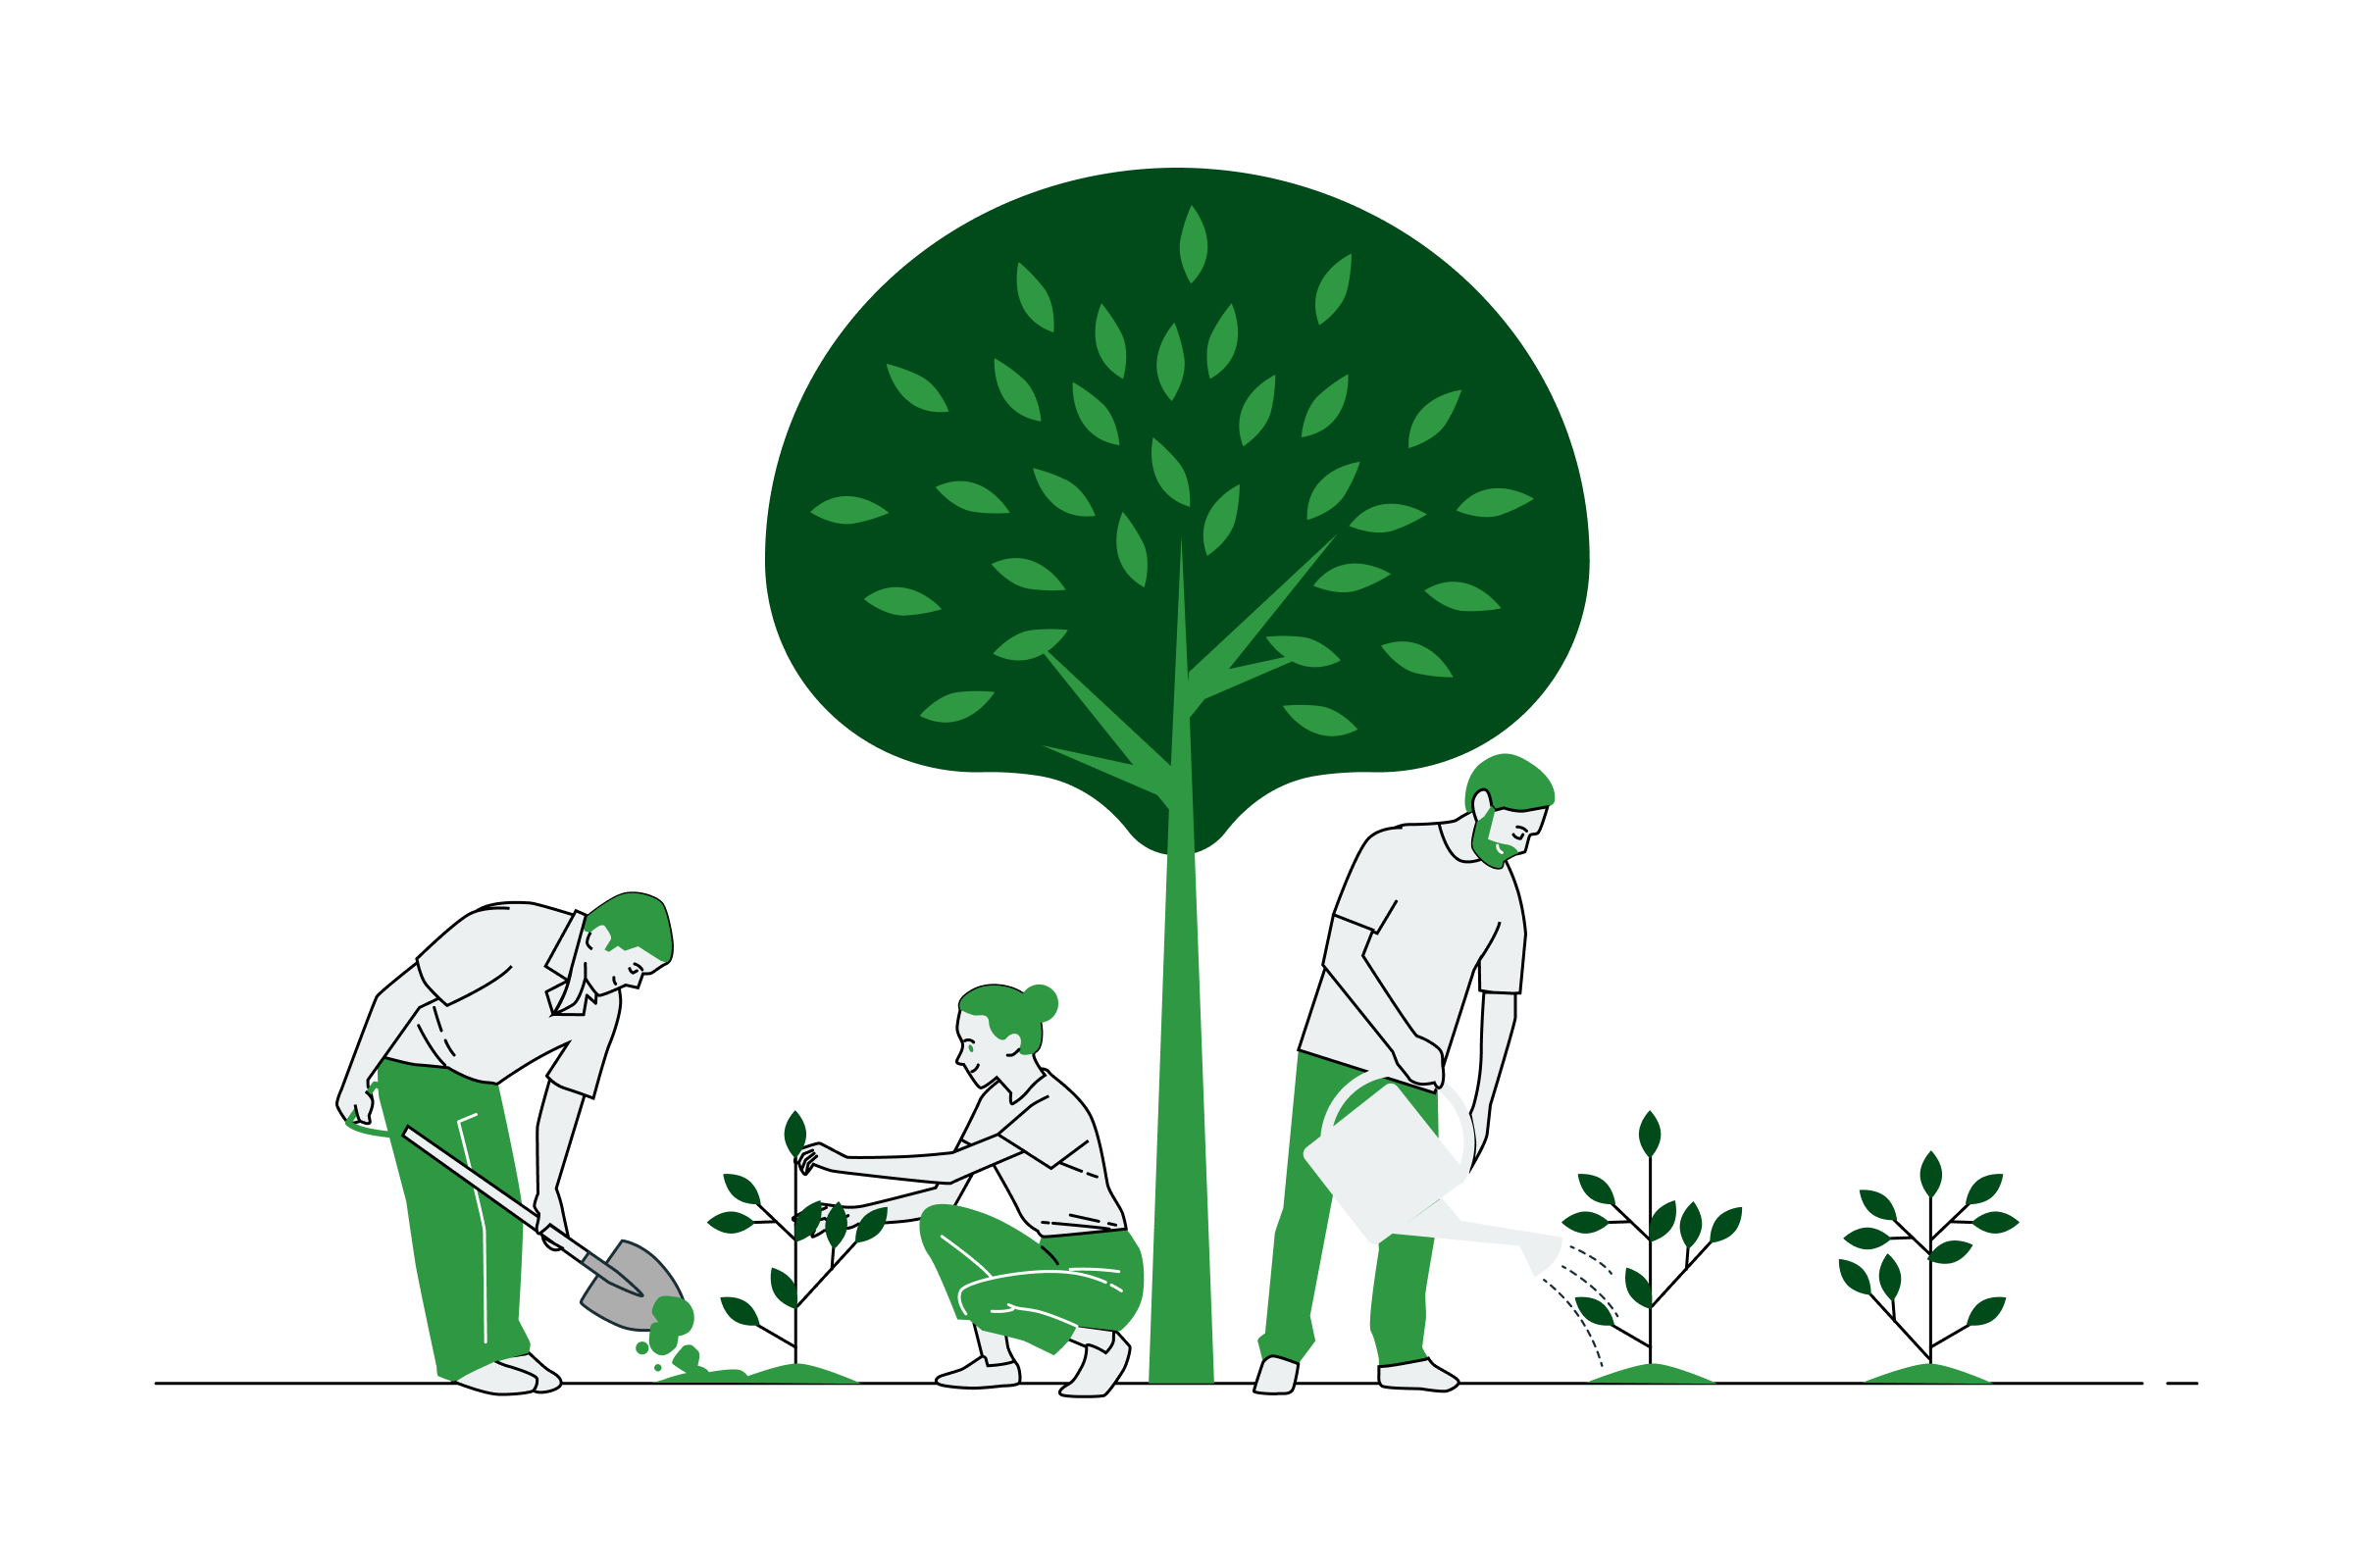  An image titled "Addressing forest loss through reforestation" showing three people planting trees on soil. The image depicts individuals engaged in reforestation efforts by growing plants on the ground. In the background, a tall tree can be seen, symbolising the positive impact of reforestation and promoting environmental conservation.